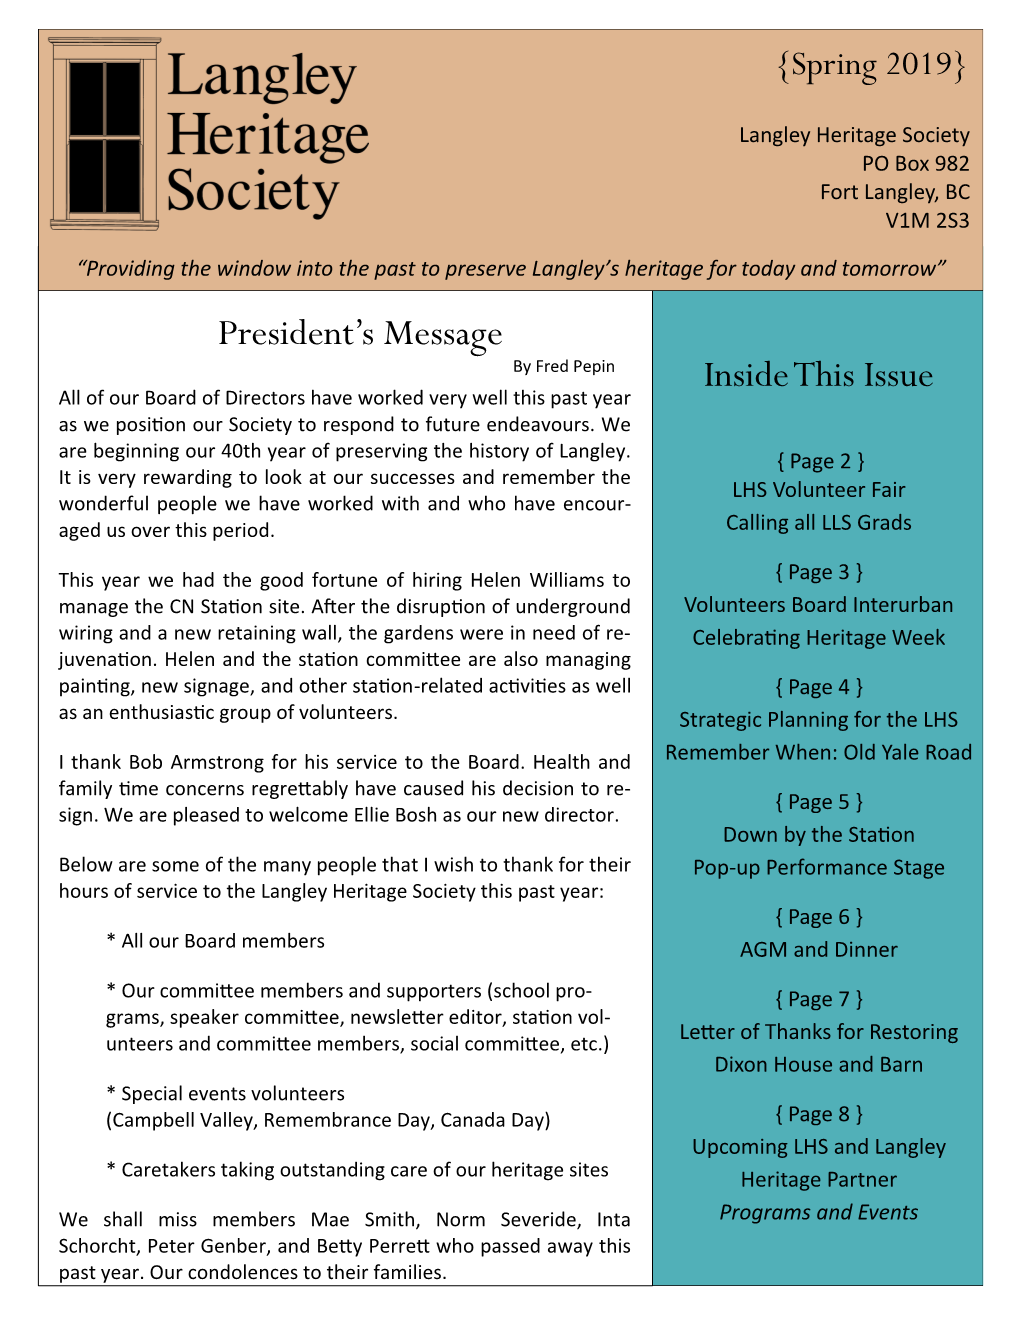 President's Message Inside This Issue